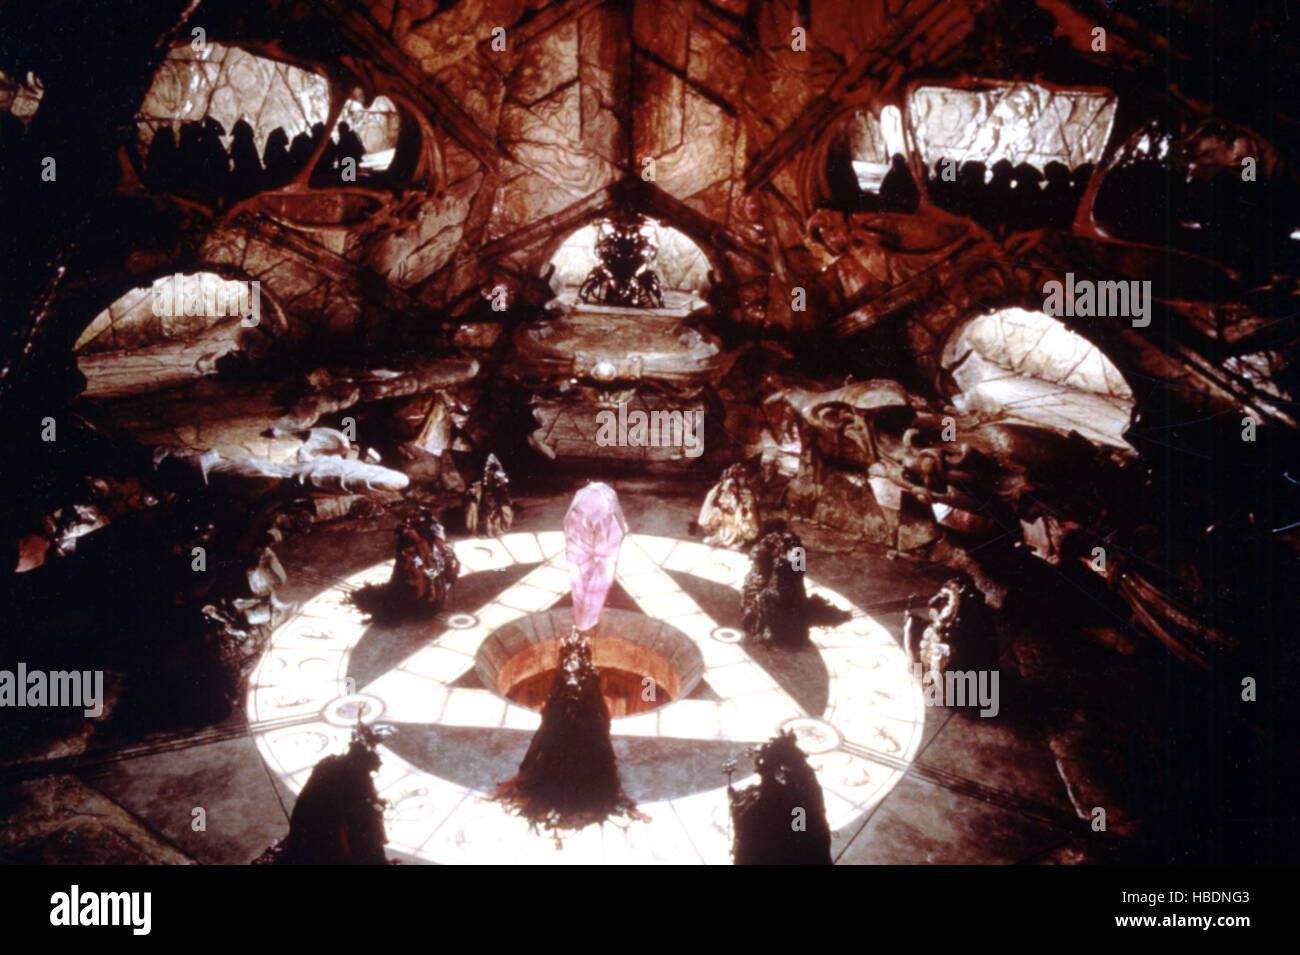 THE DARK CRYSTAL, Skekis in the crystal chamber, 1982, (c)Universal Pictures/courtesy Everett Collection Stock Photo